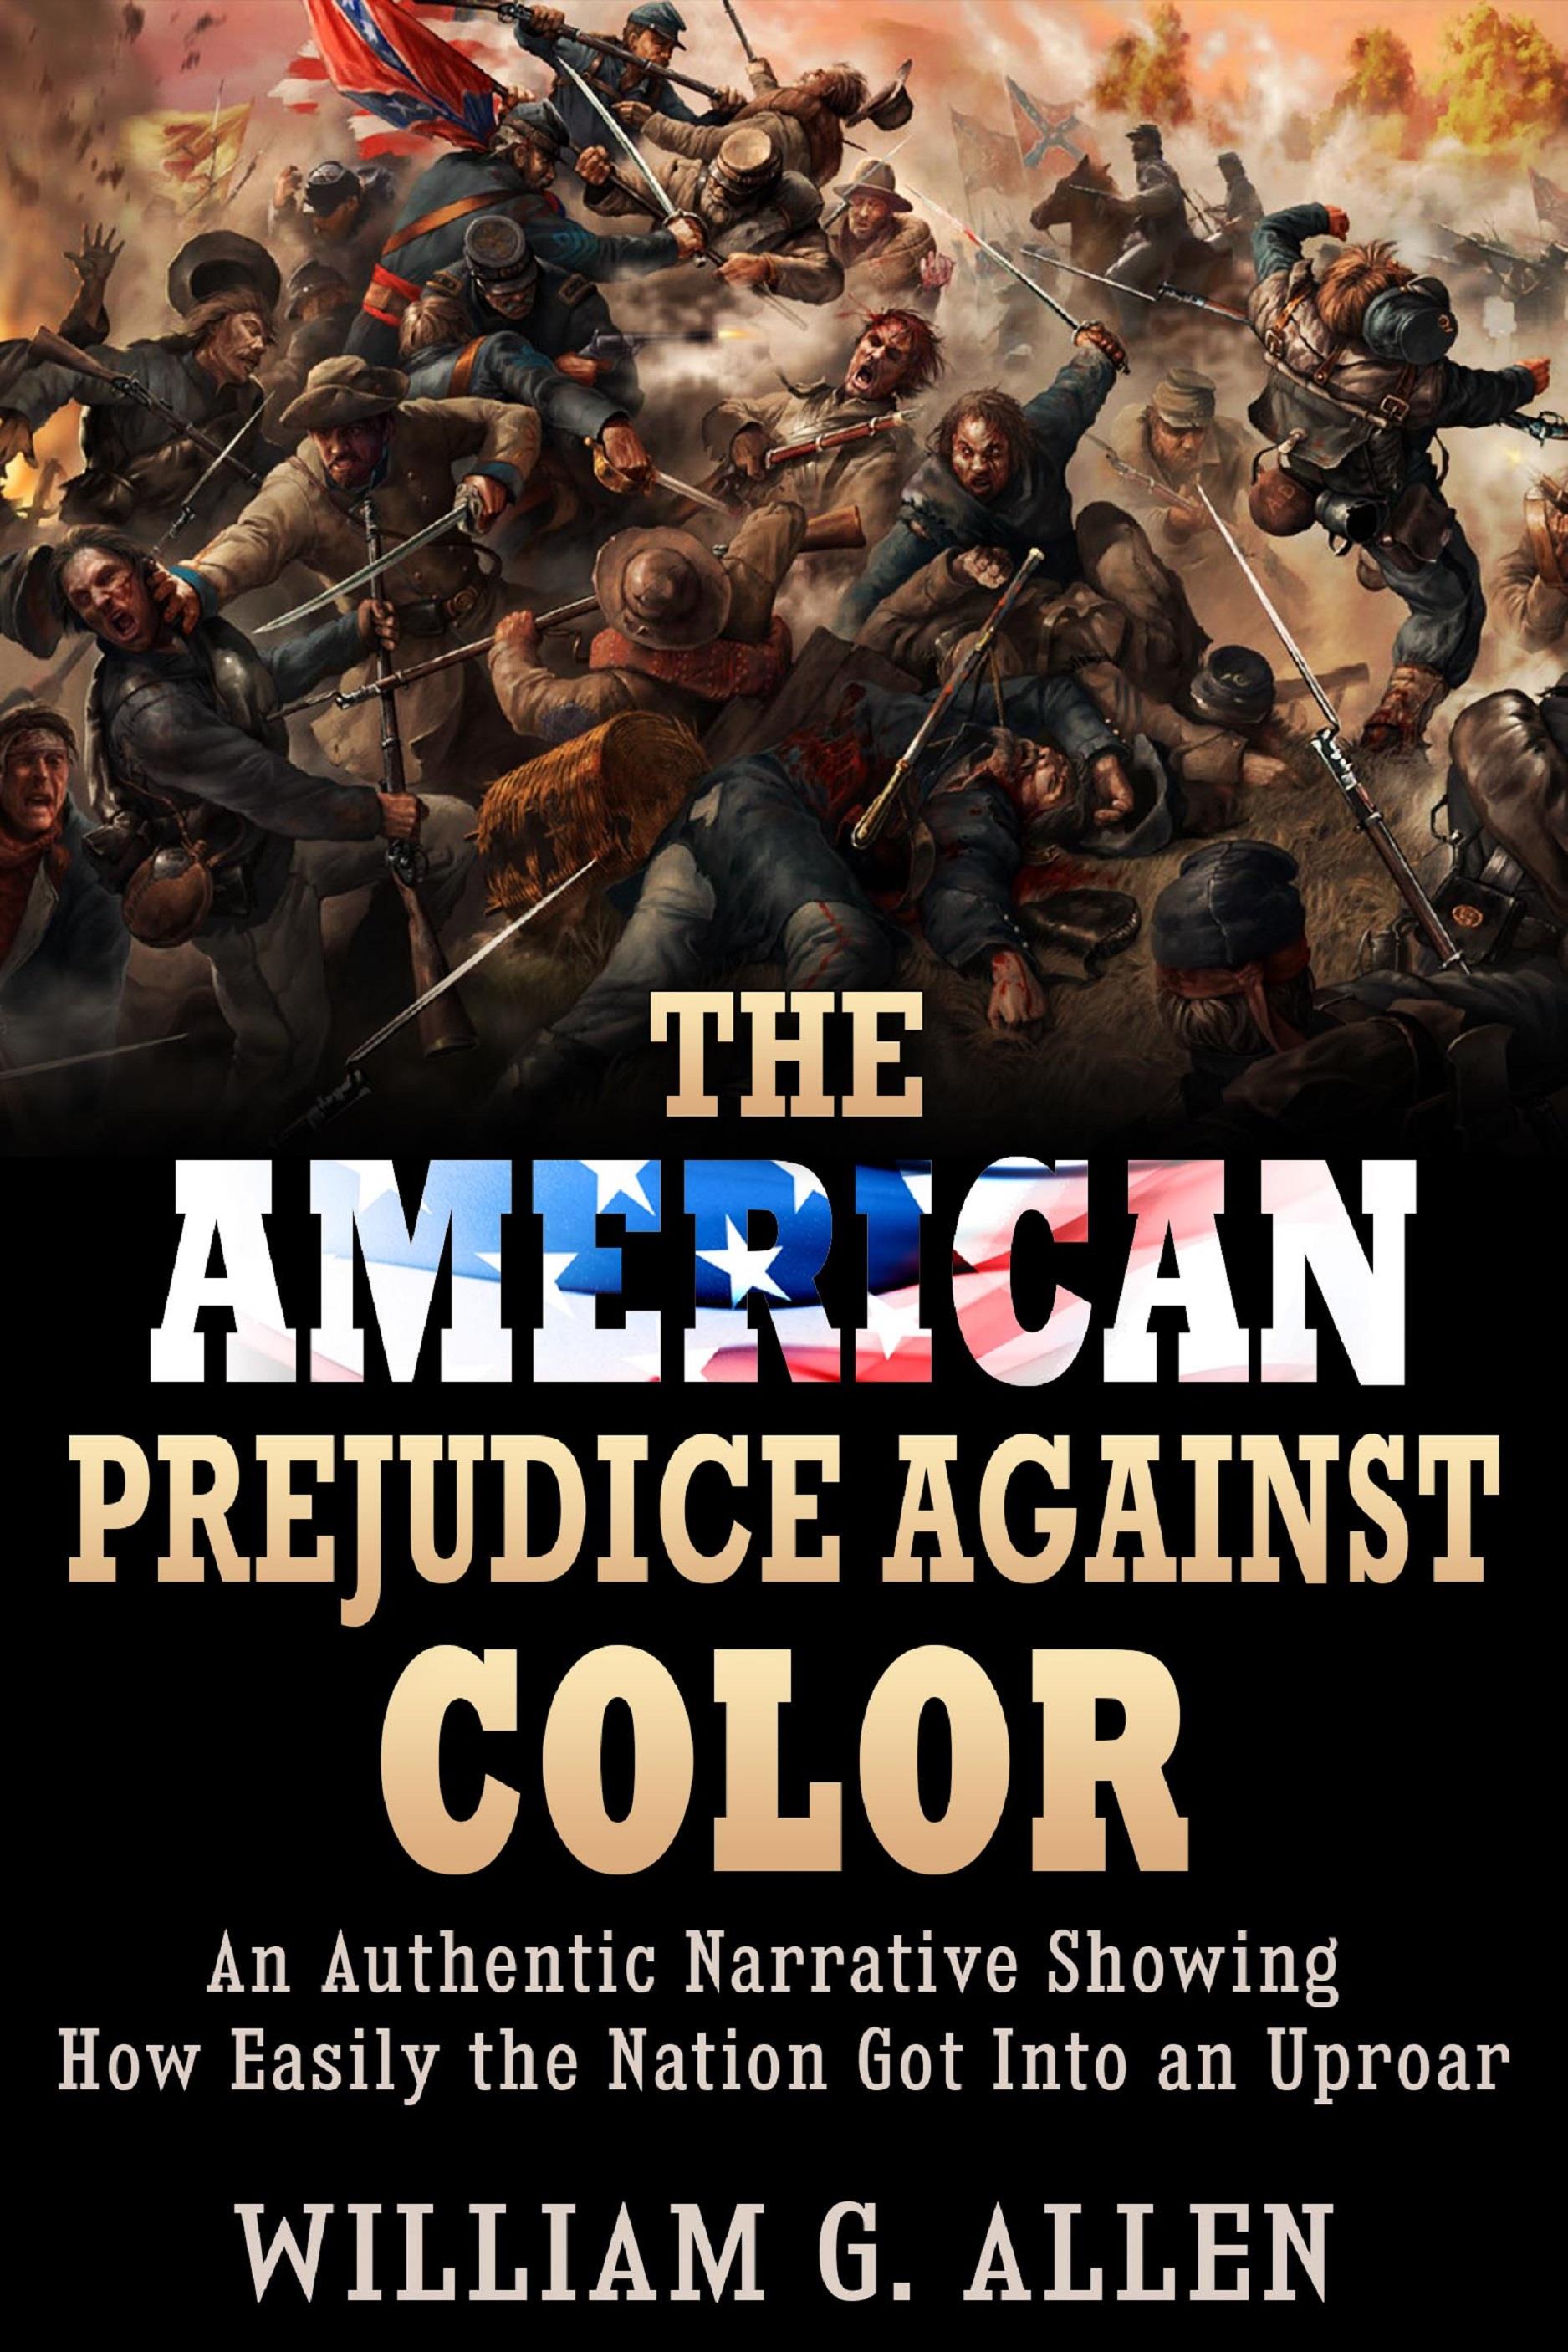 The American Prejudice Against Color - An authentic Narrative showing how easily the Nation got into an Uproar